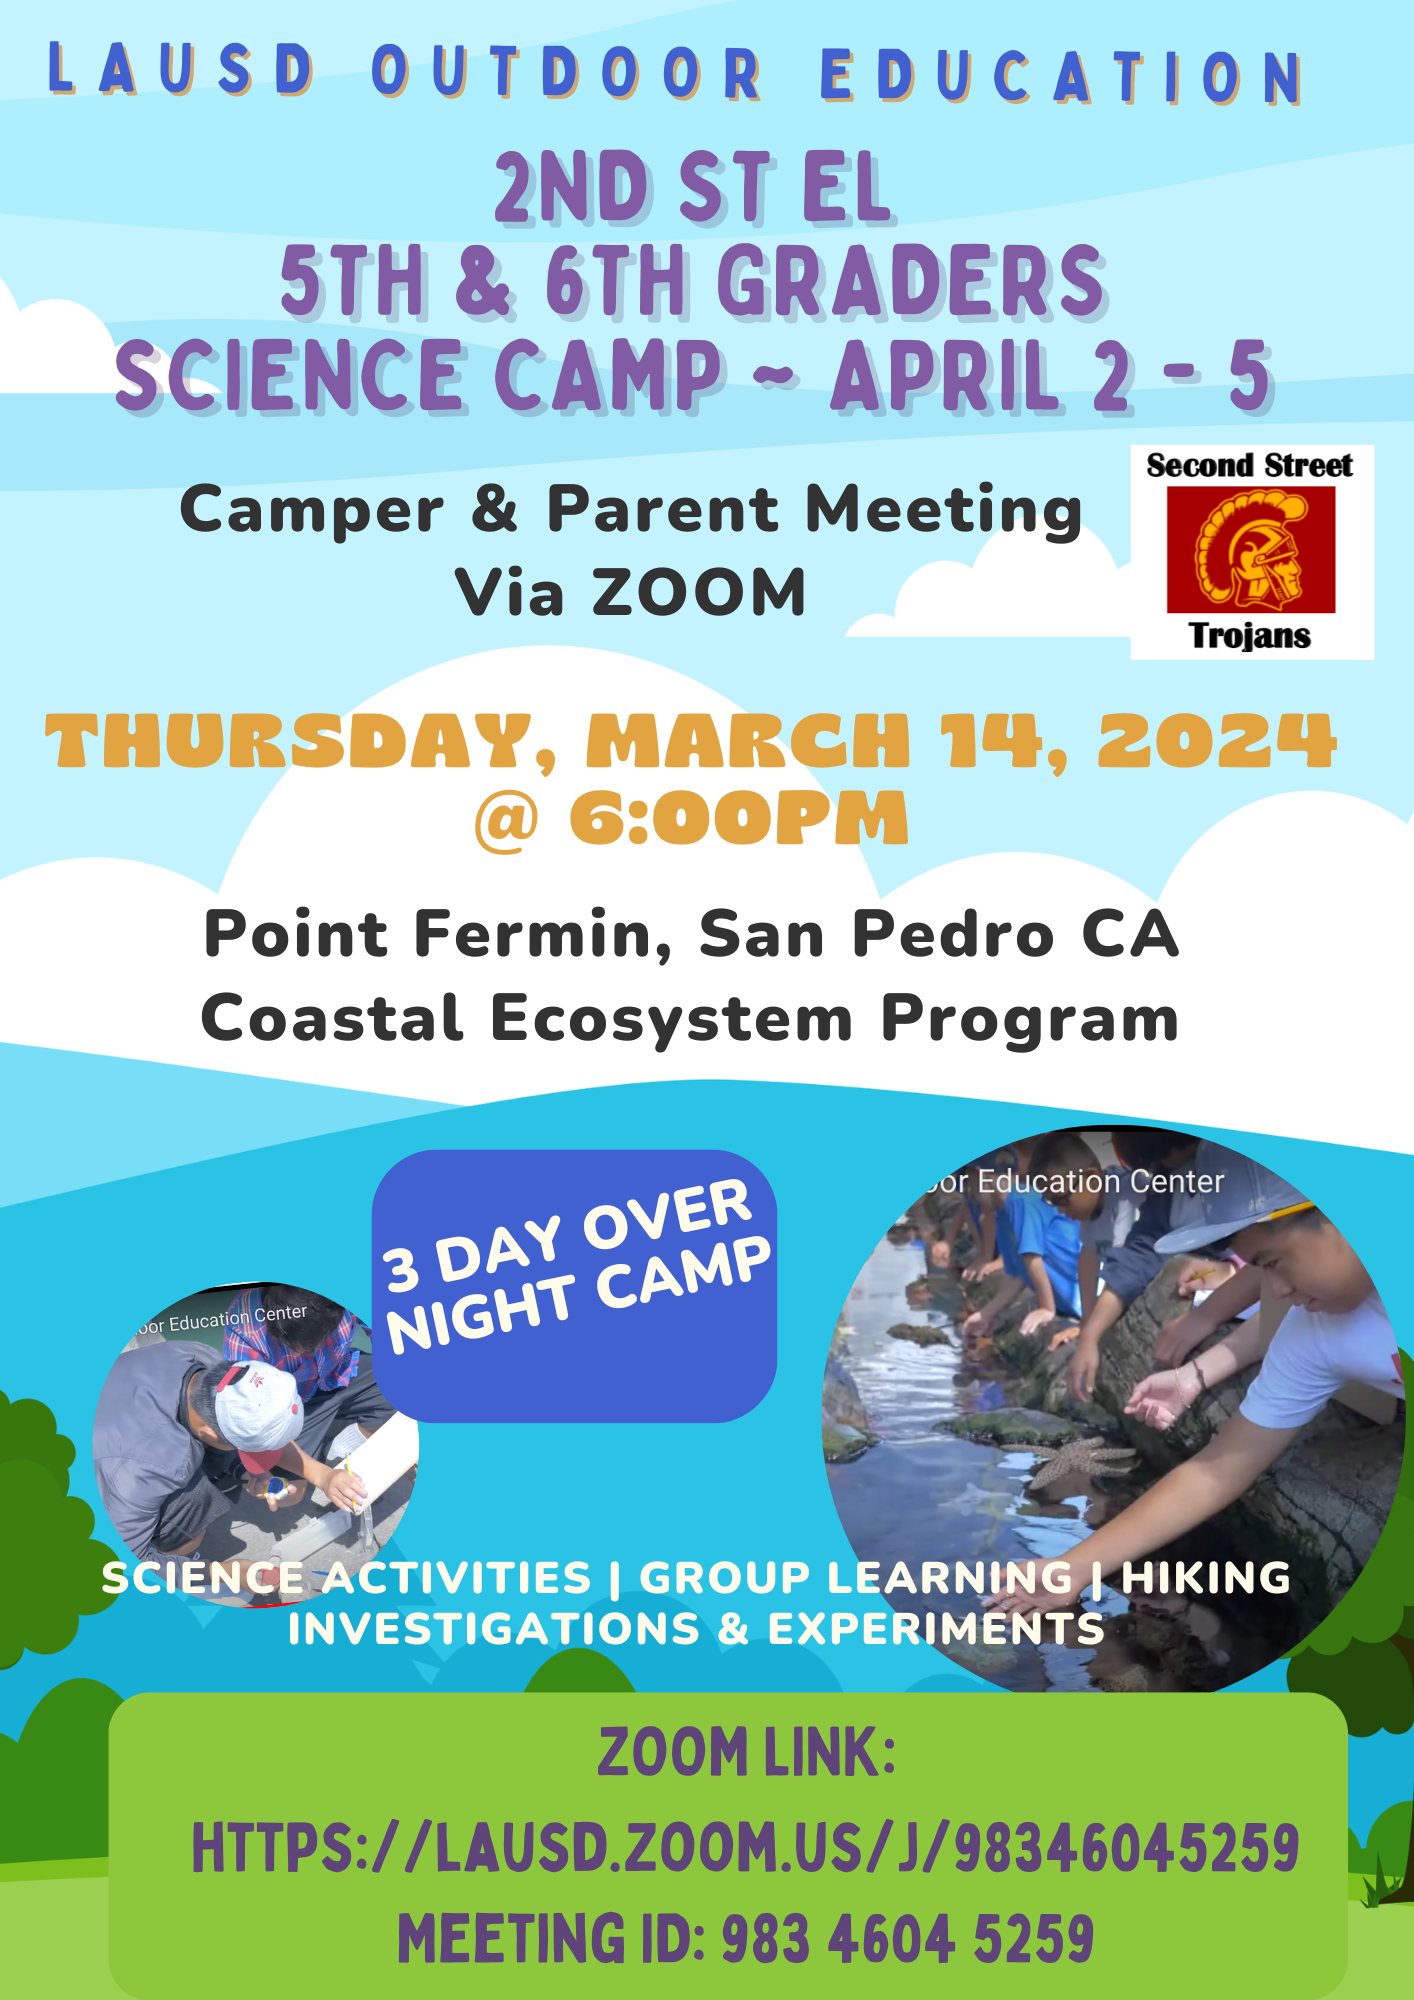 Science camp